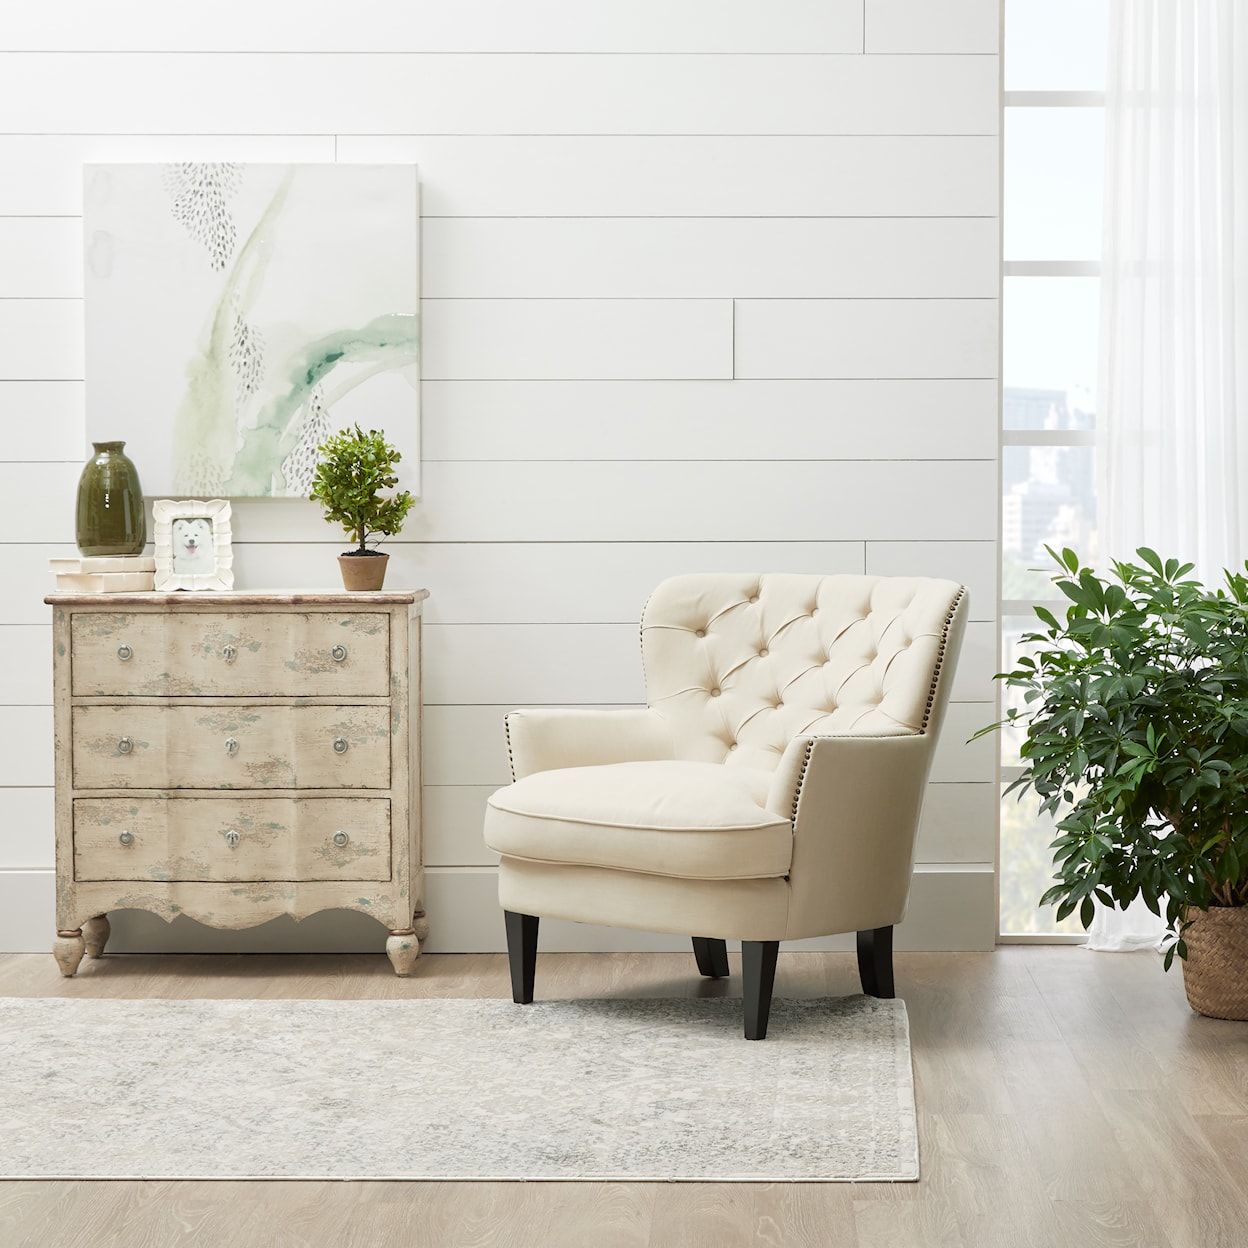 Accentrics Home Accents Three Drawer Accent Chest in Farmhouse Cream